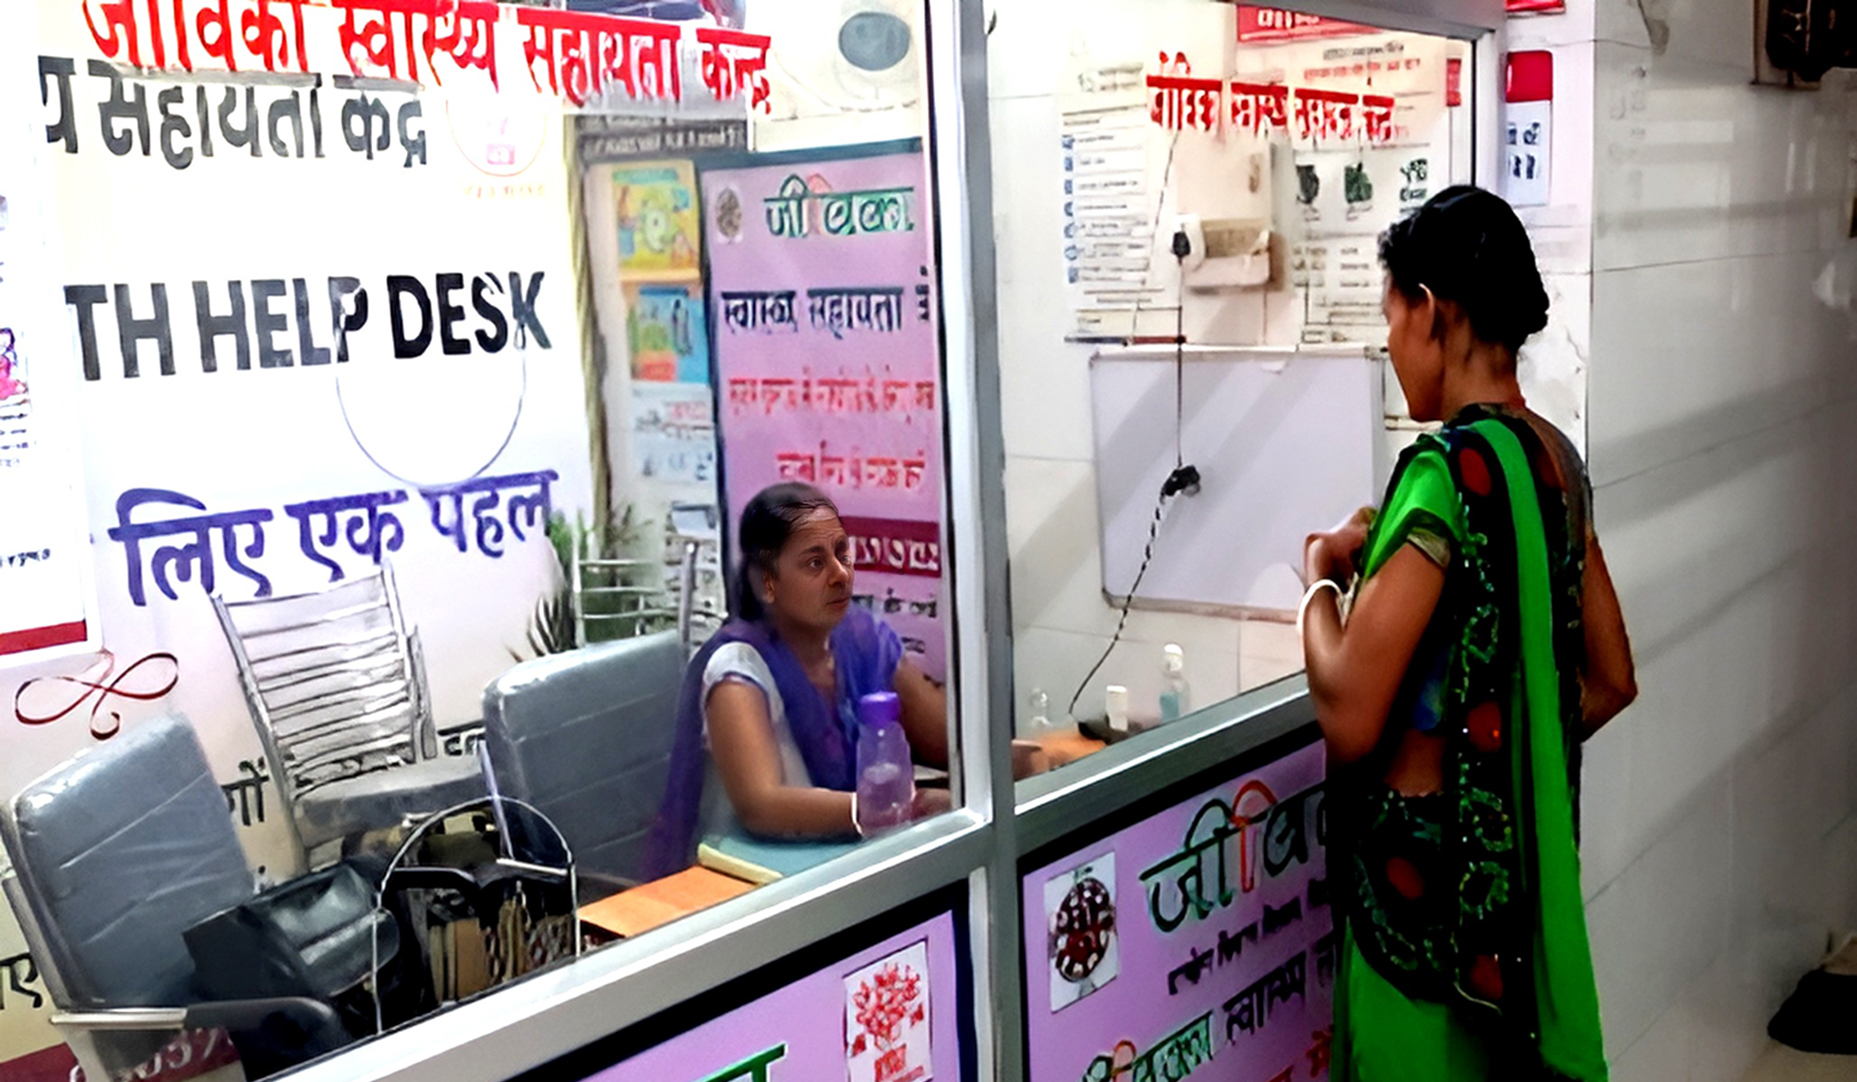 Bridging the Healthcare Divide in Rural Bihar: How JEEViKA’s Swasthya Mitra Help Desk is Changing Lives